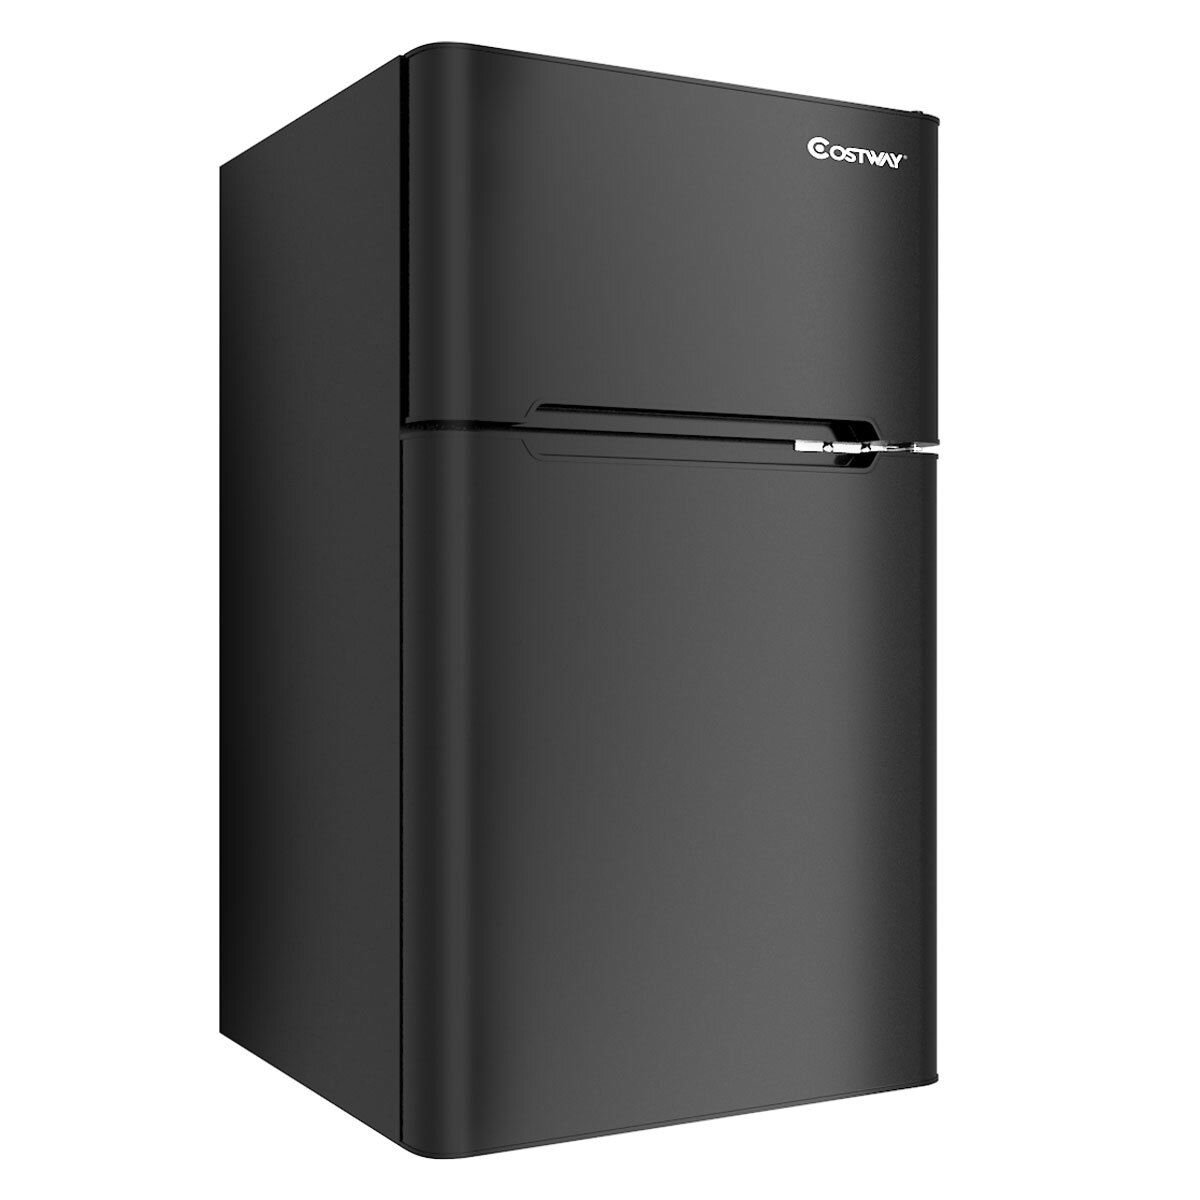 Jeremy Cass 3.5 Cu. ft. Compact Refrigerator Mini Fridge in Black with Freezer Small Refrigerator with 2 Door